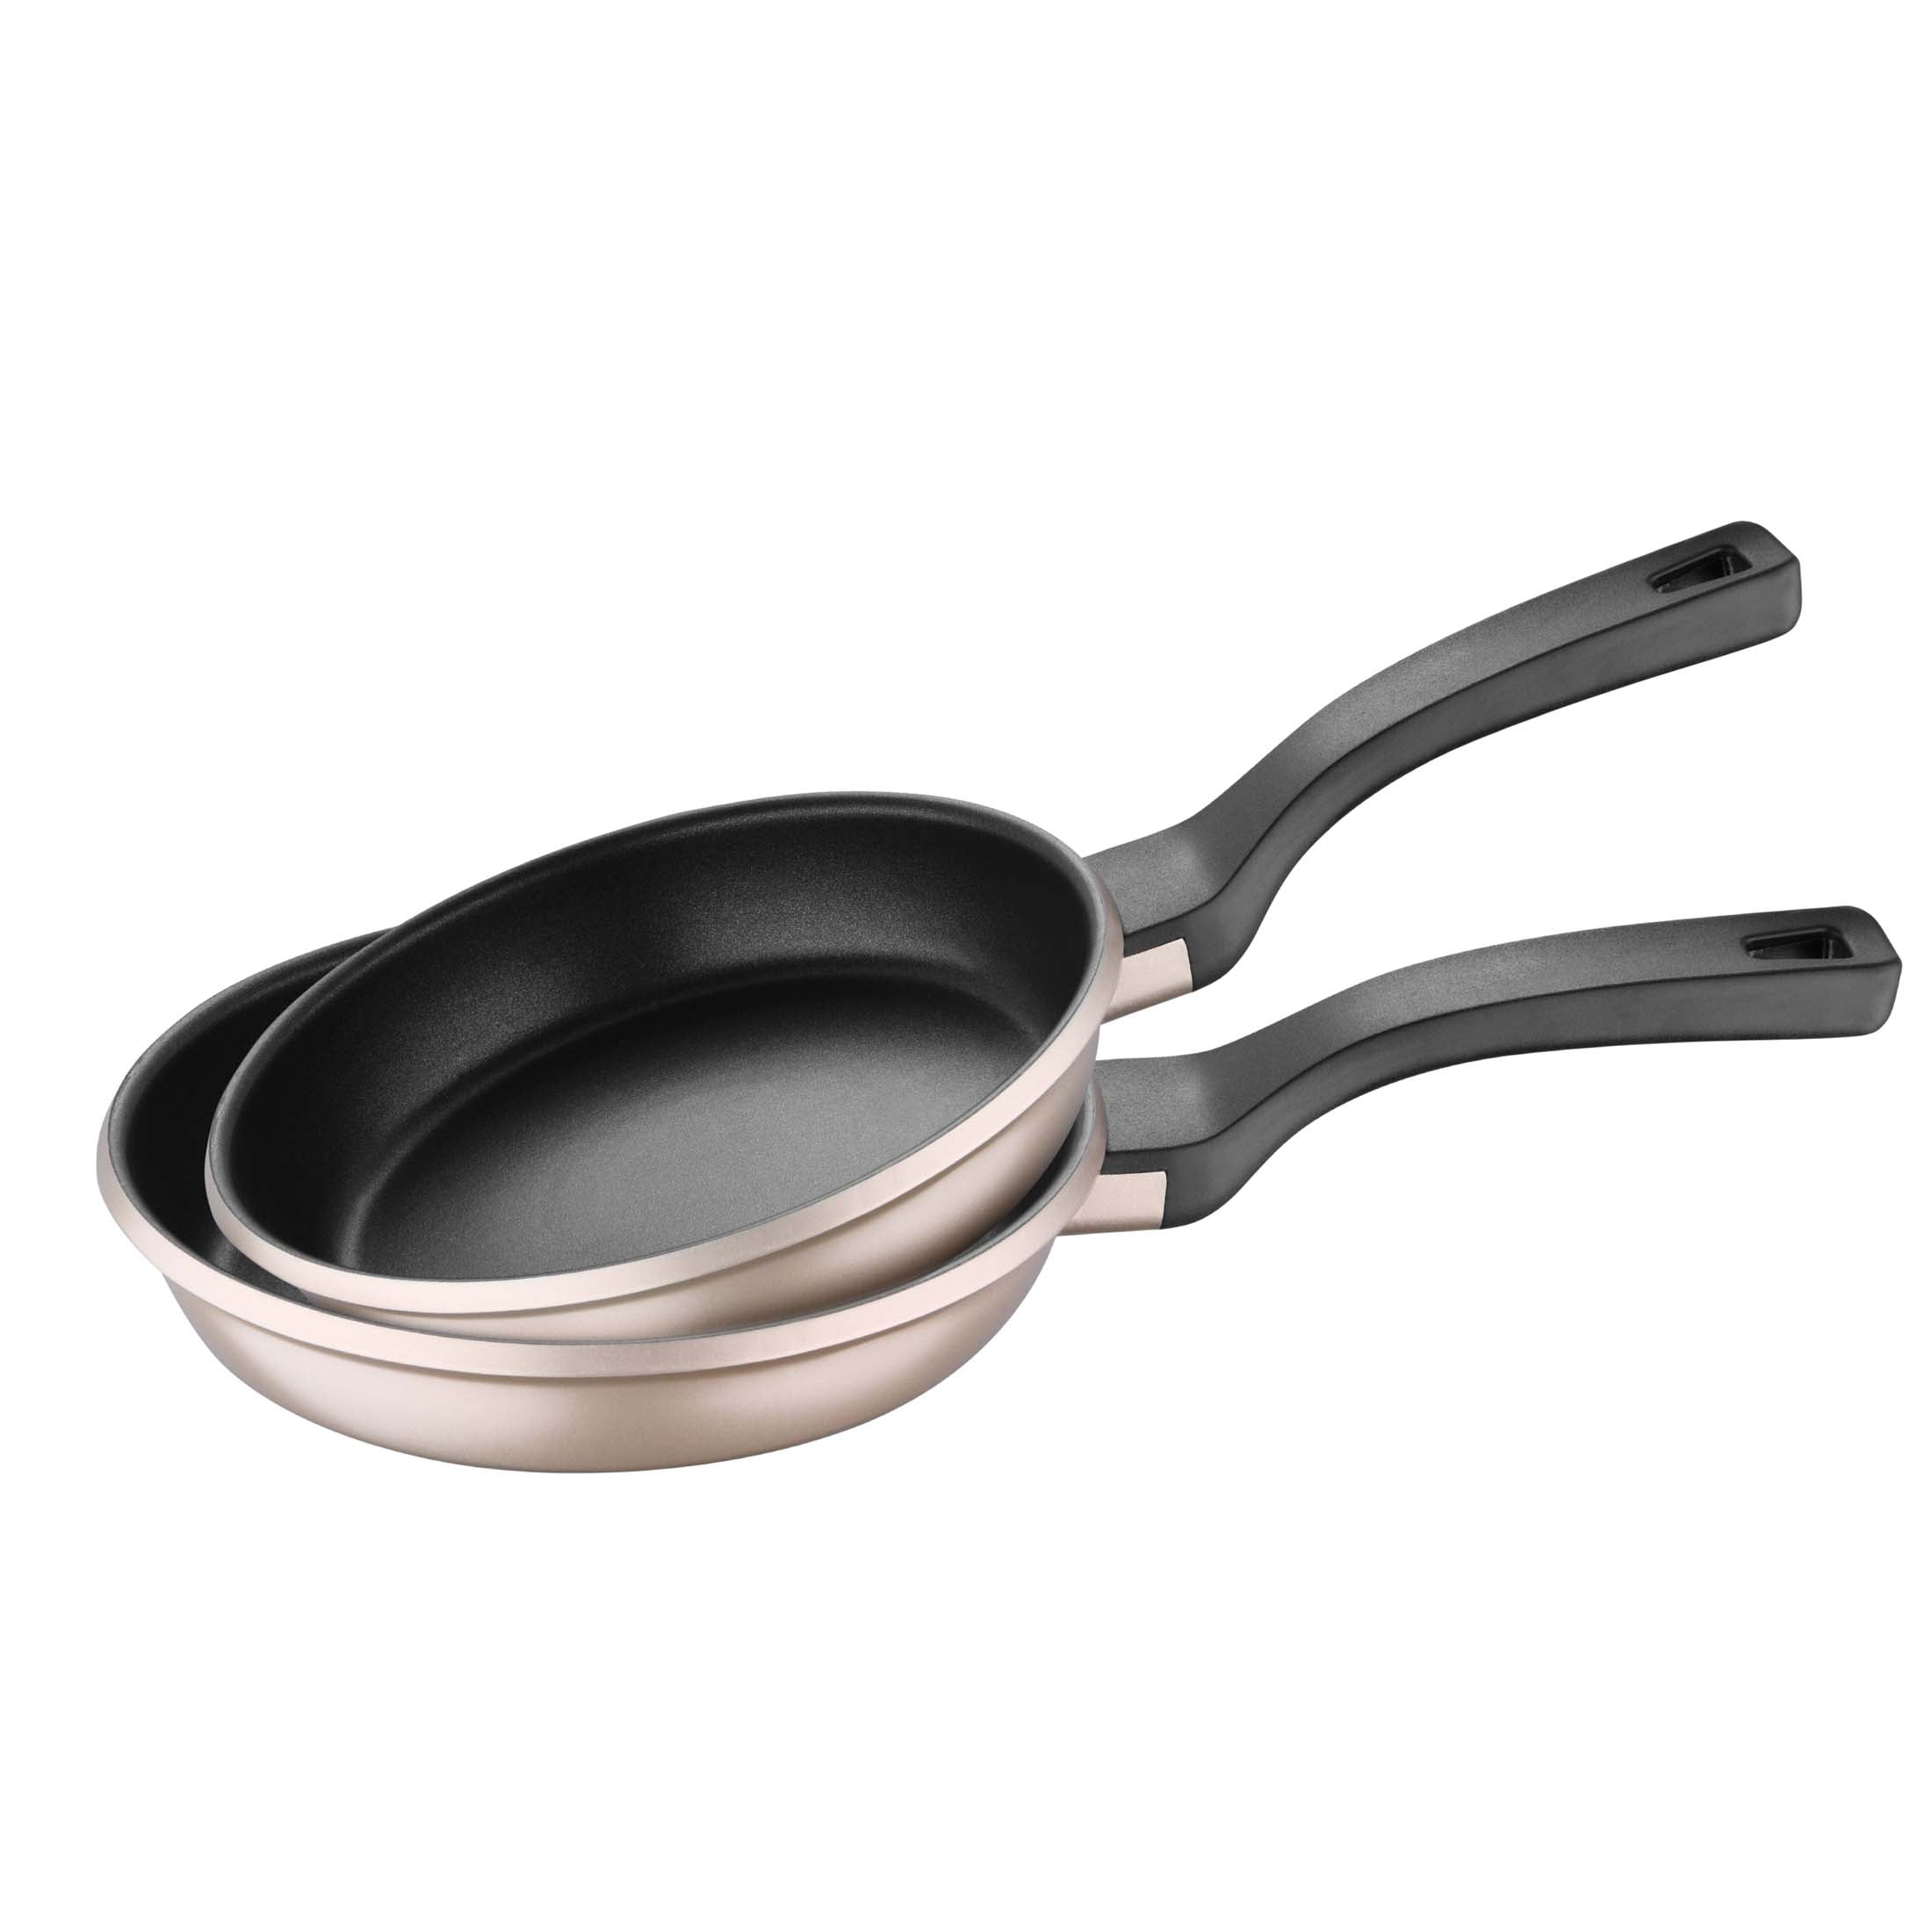 Fry Pans, Non-Stick Surface, 2-Pc. Set, As Seen on TV